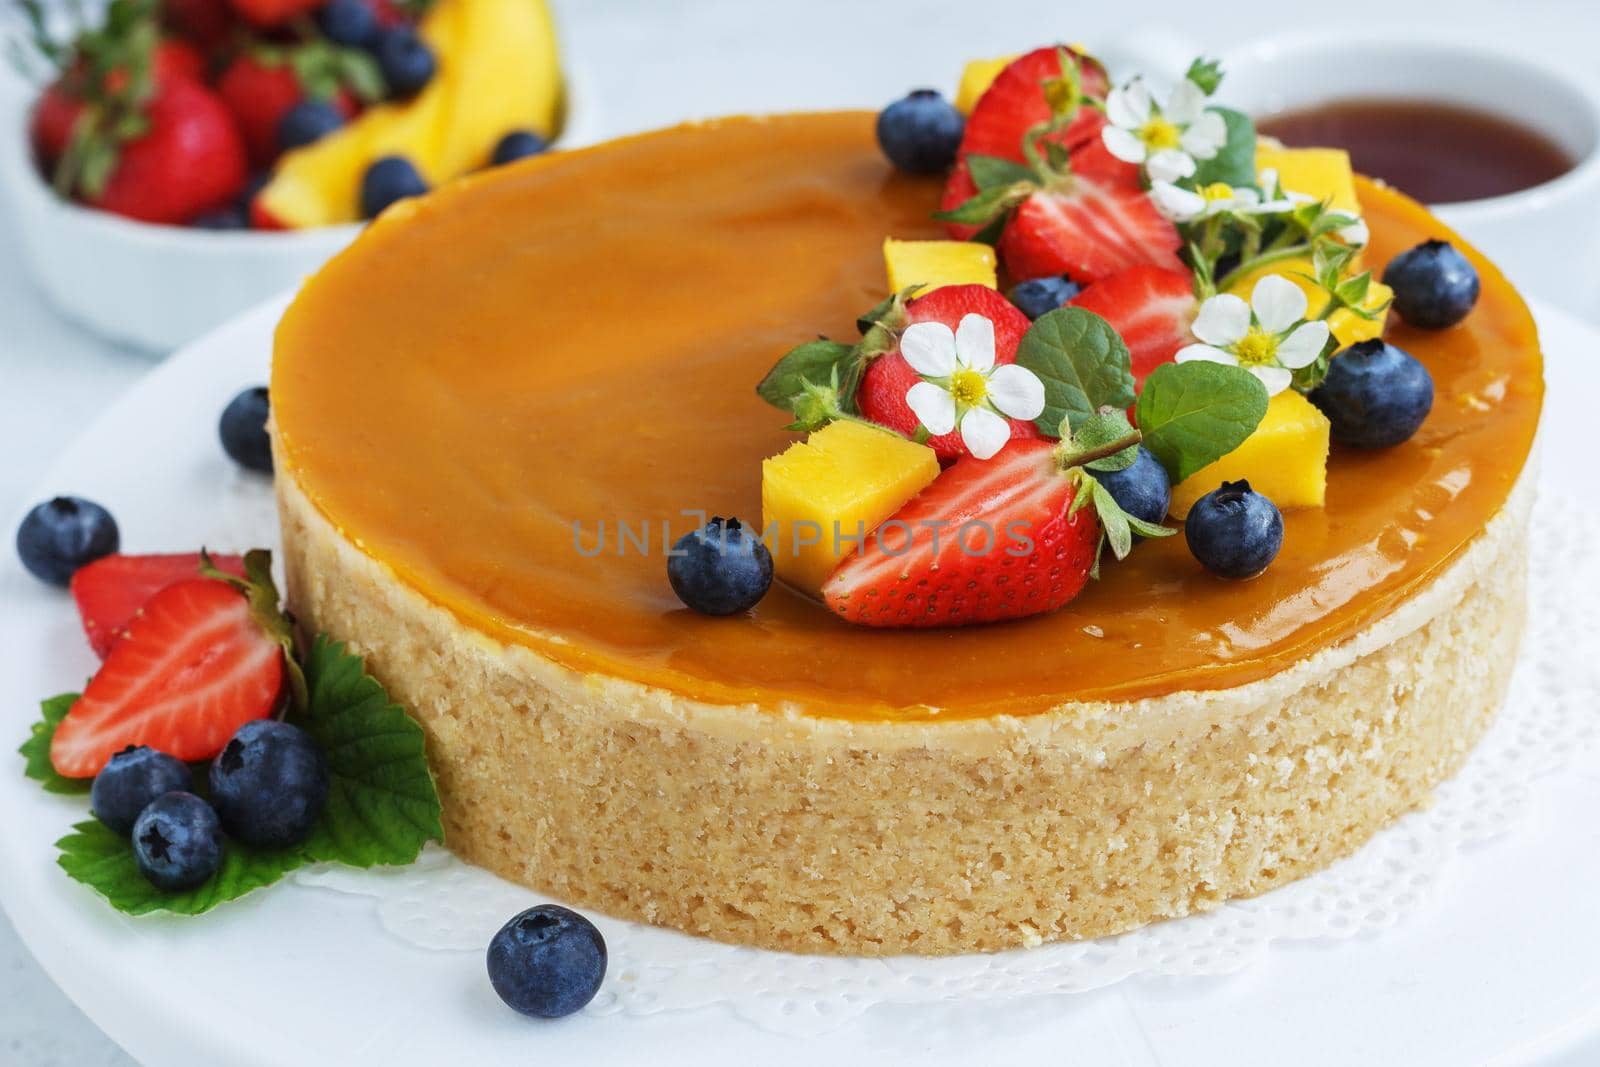 Mango cheesecake decorated with berries, mango slices and flowers on a stand. Close-up by lara29